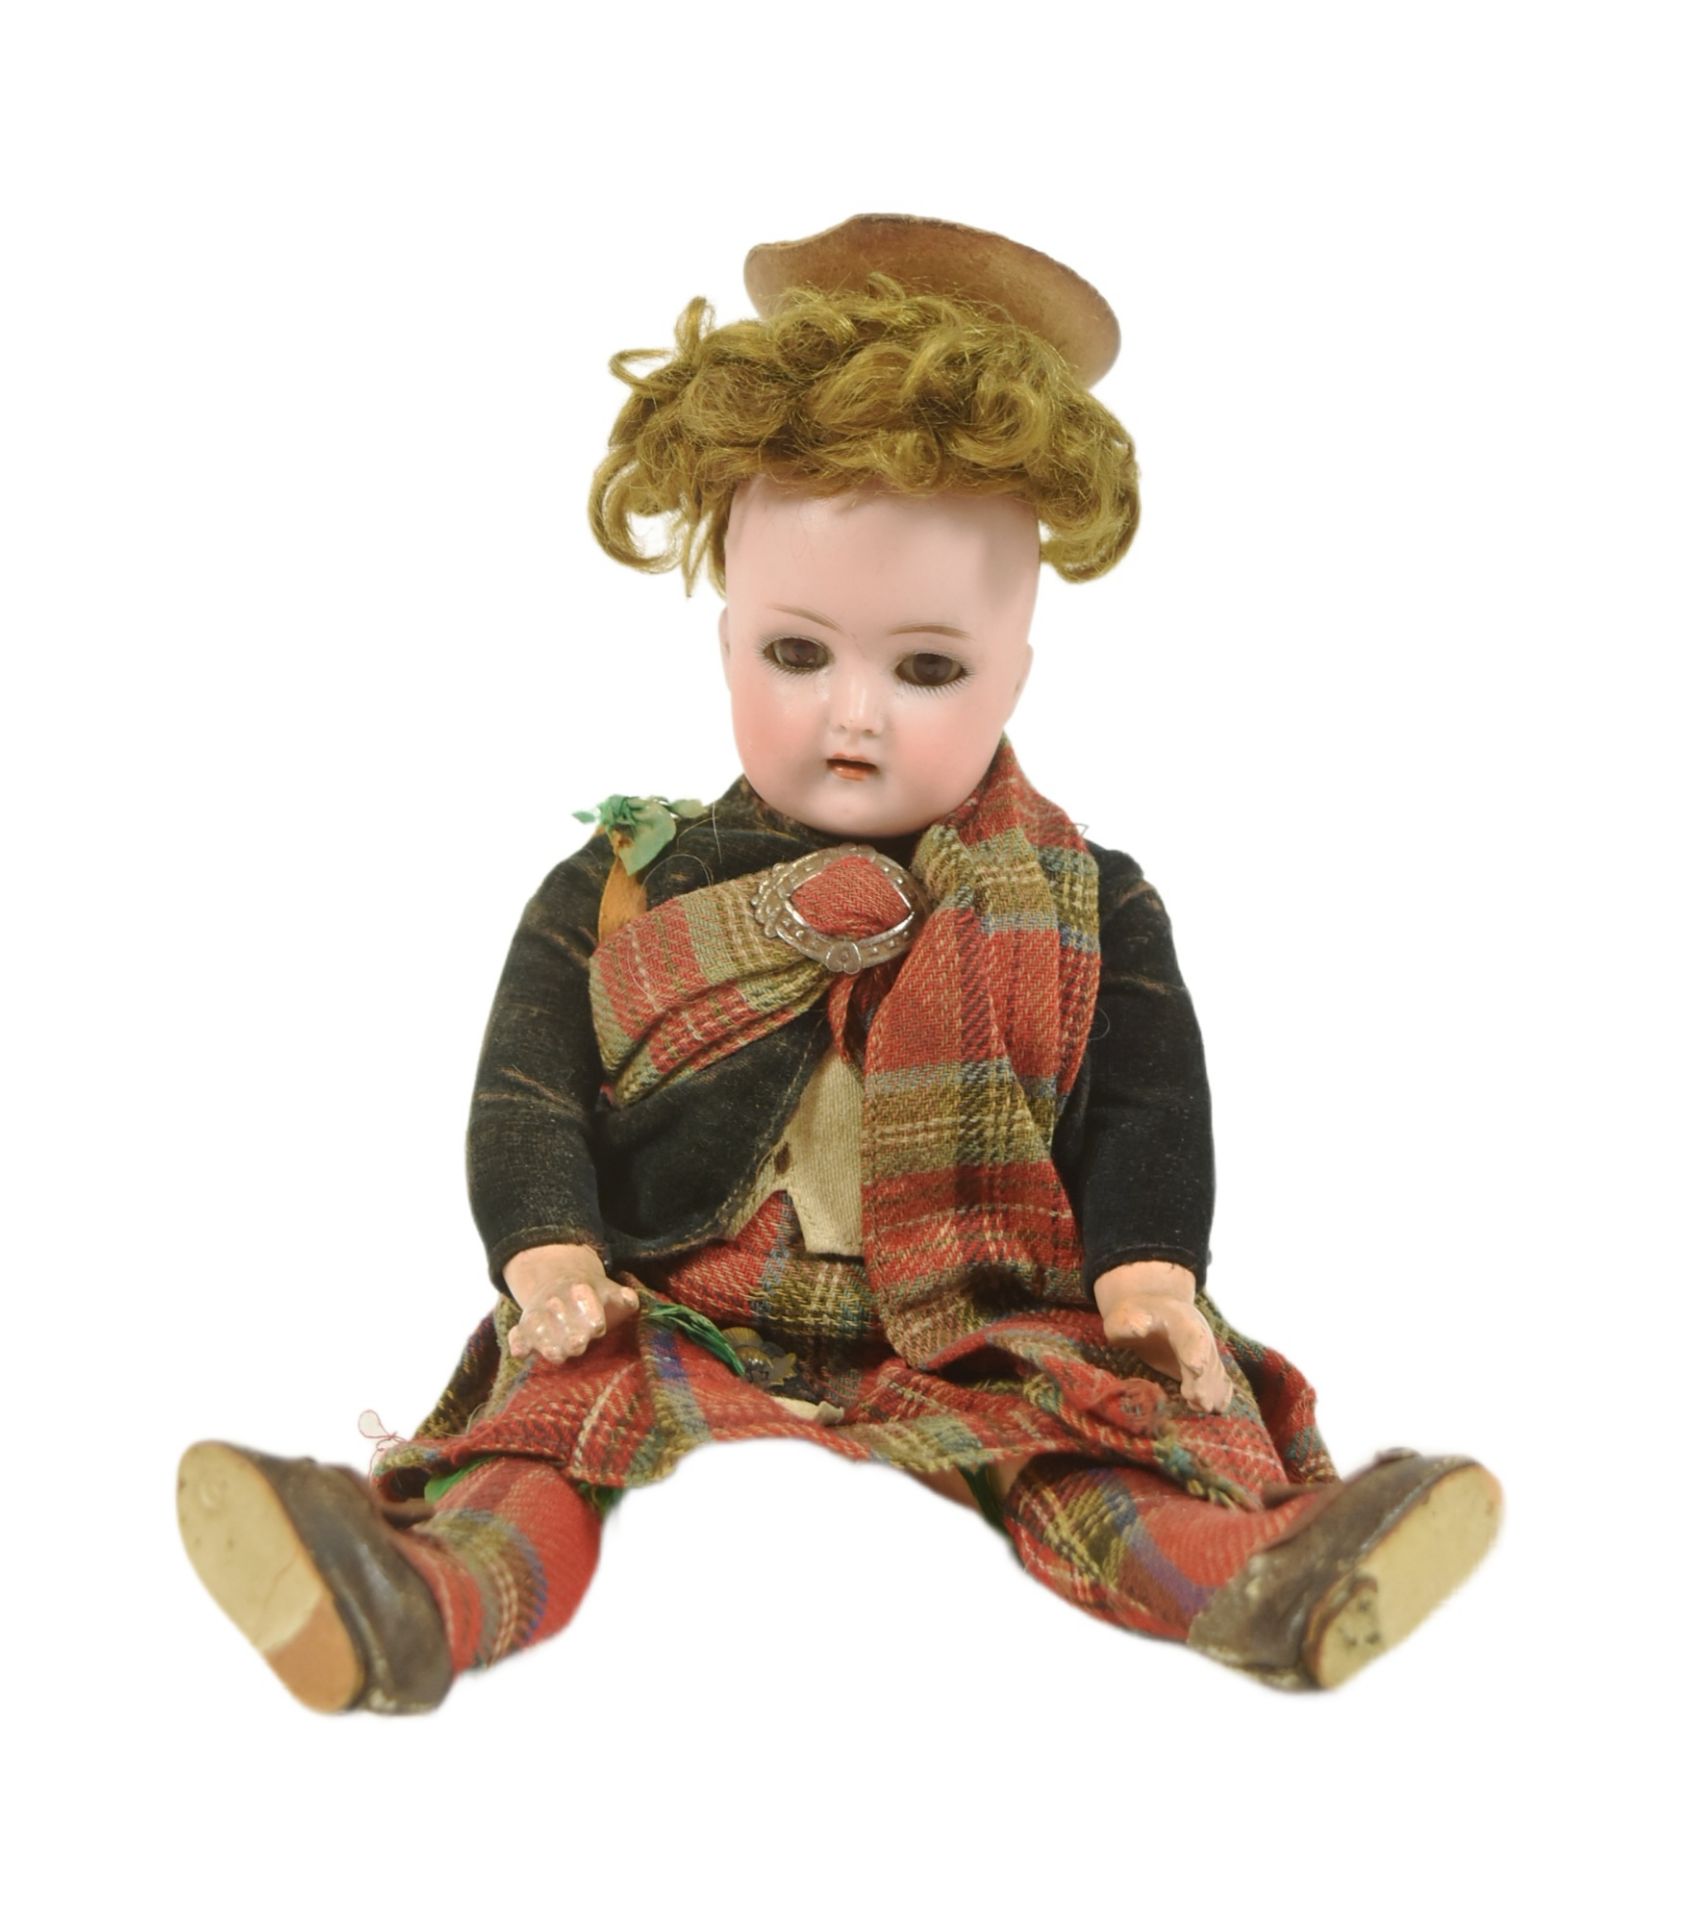 EARLY 20TH CENTURY GERMAN SIMON & HALBIG BISQUE HEADED DOLL